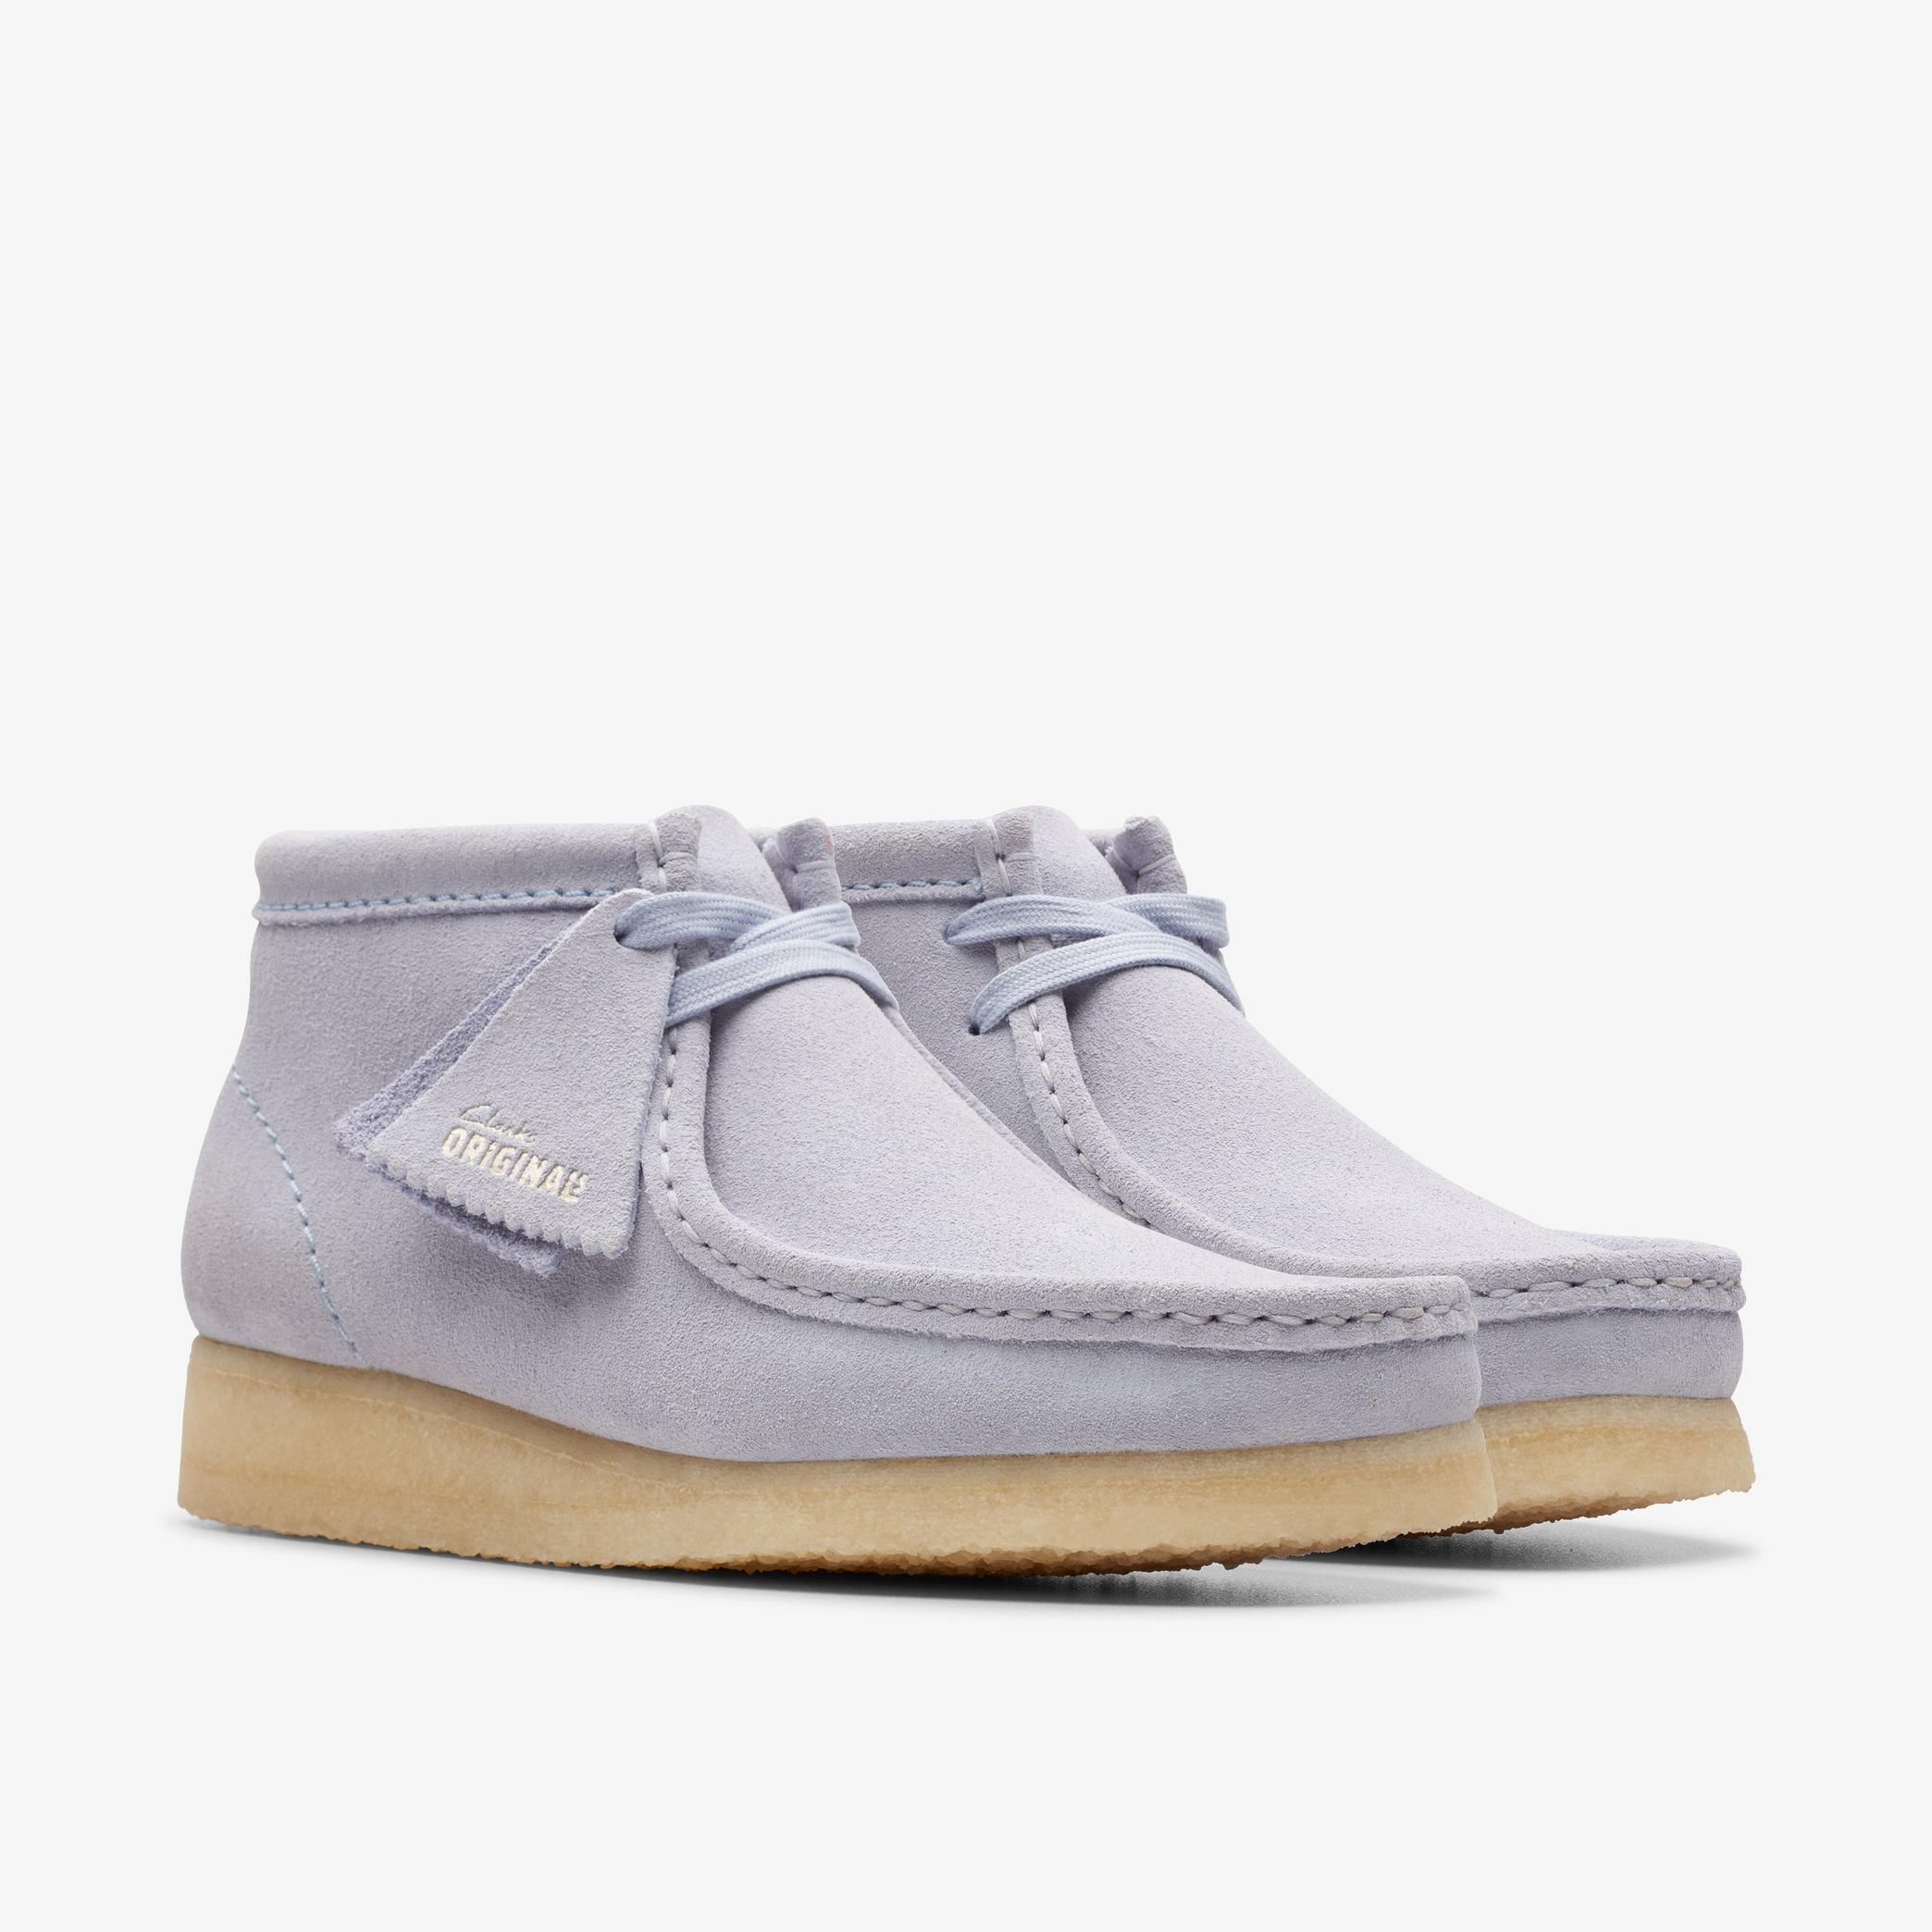 Wallabee Boot Cloud Grey Suede Wallabee, view 4 of 7